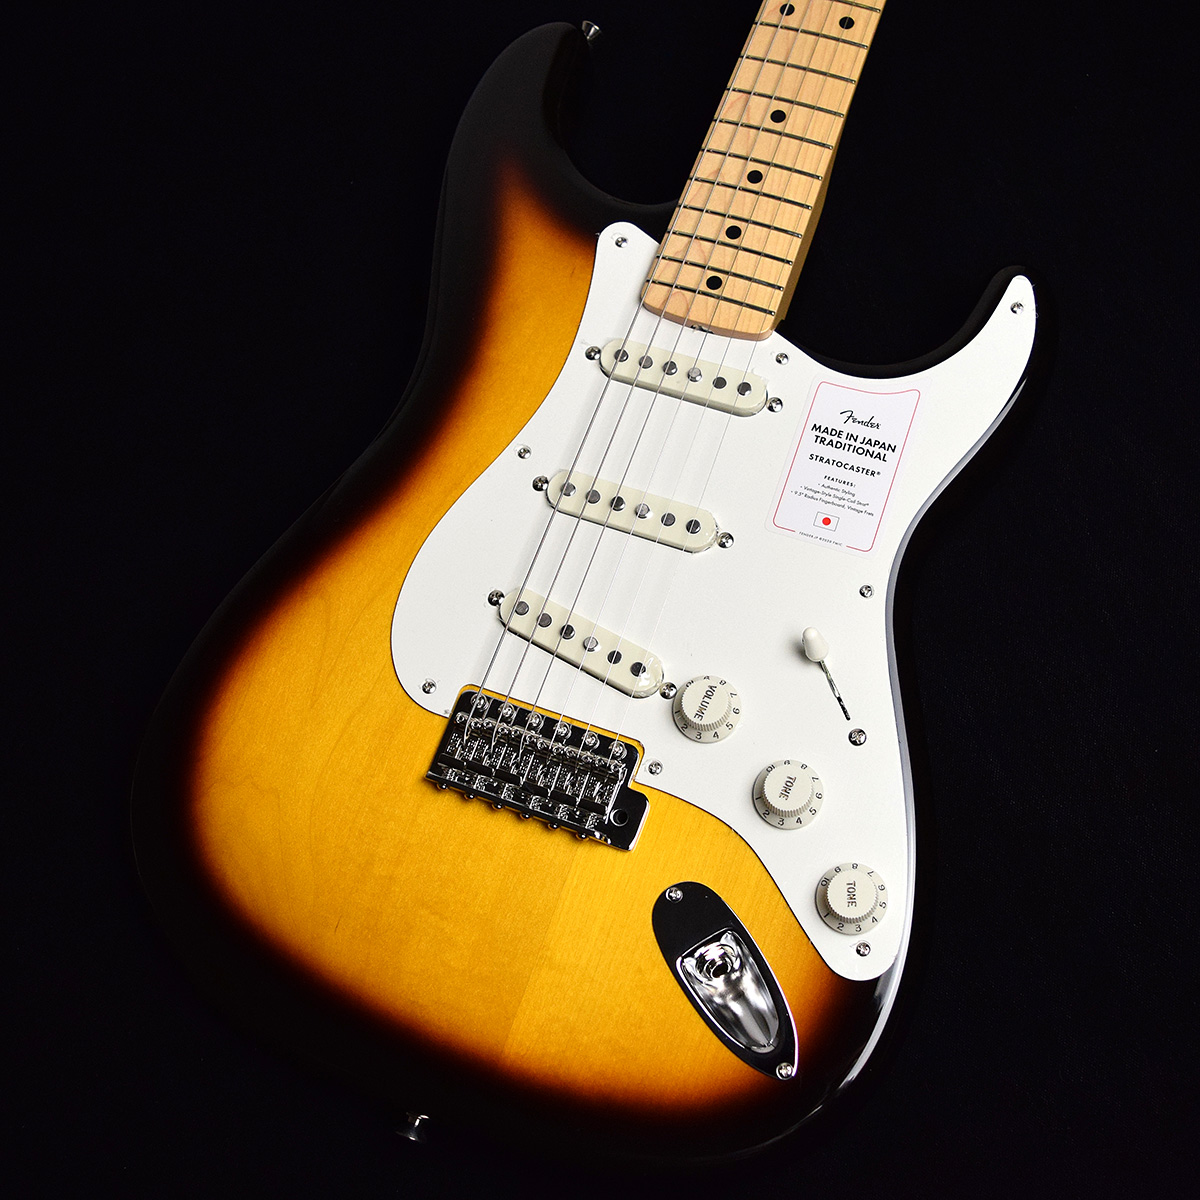 Fender Made in Japan Traditional 50s Stratocaster Maple ...